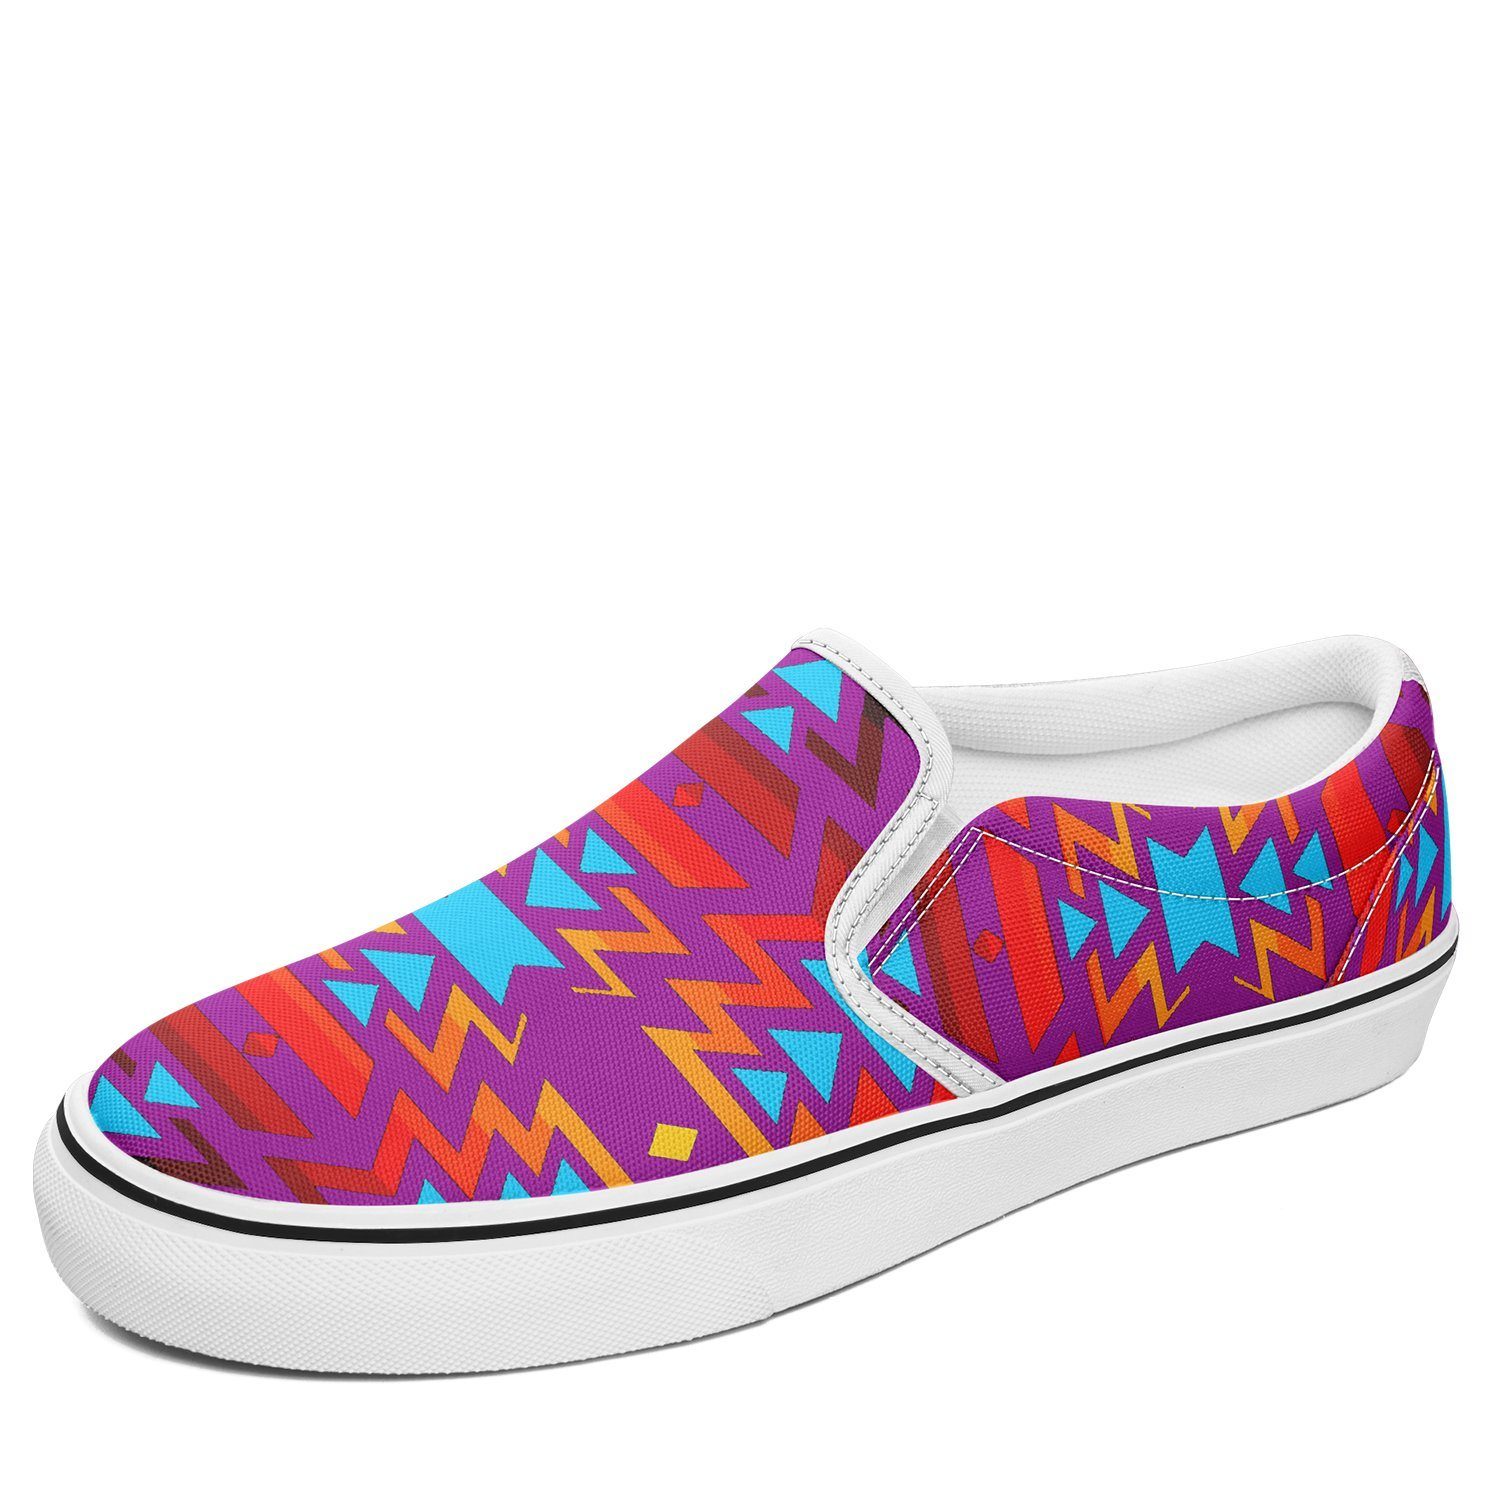 Fire Colors and Turquoise Purple Otoyimm Kid's Canvas Slip On Shoes 49 Dzine US Youth 1 / EUR 32 White Sole 